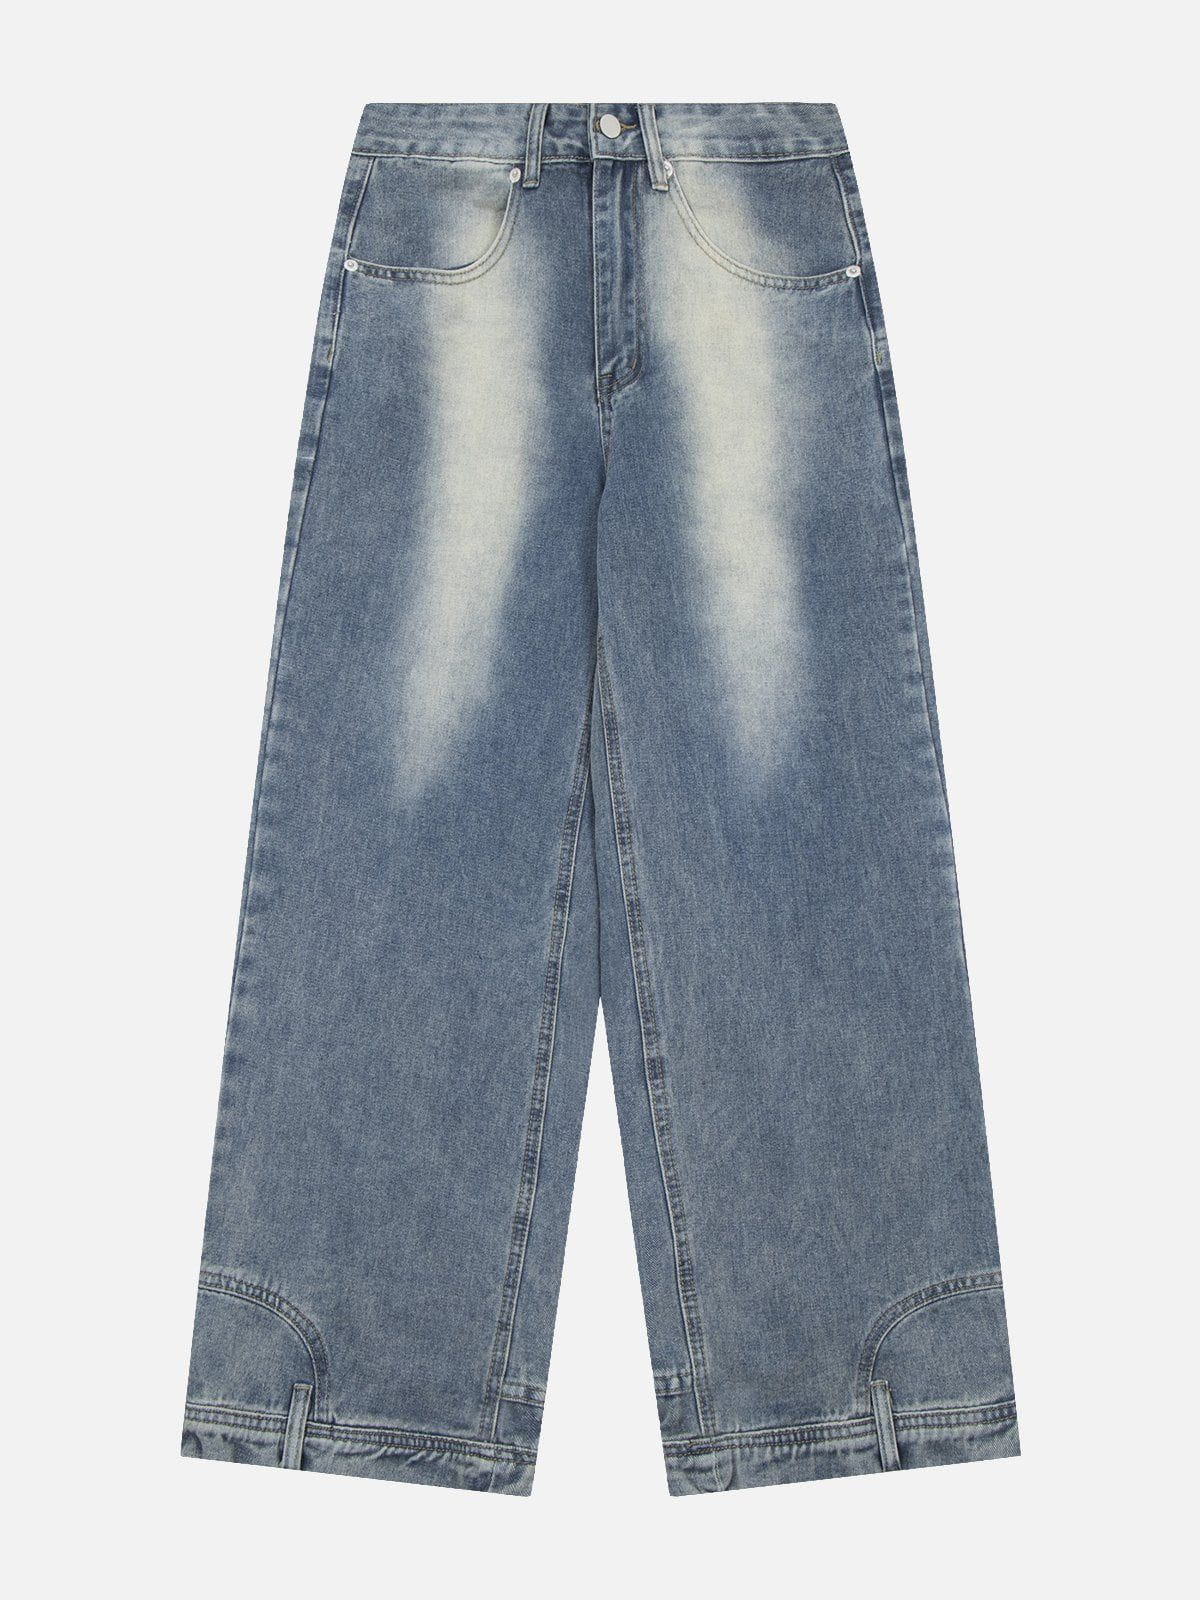 Aelfric Eden Reverse Washed Loose Jeans